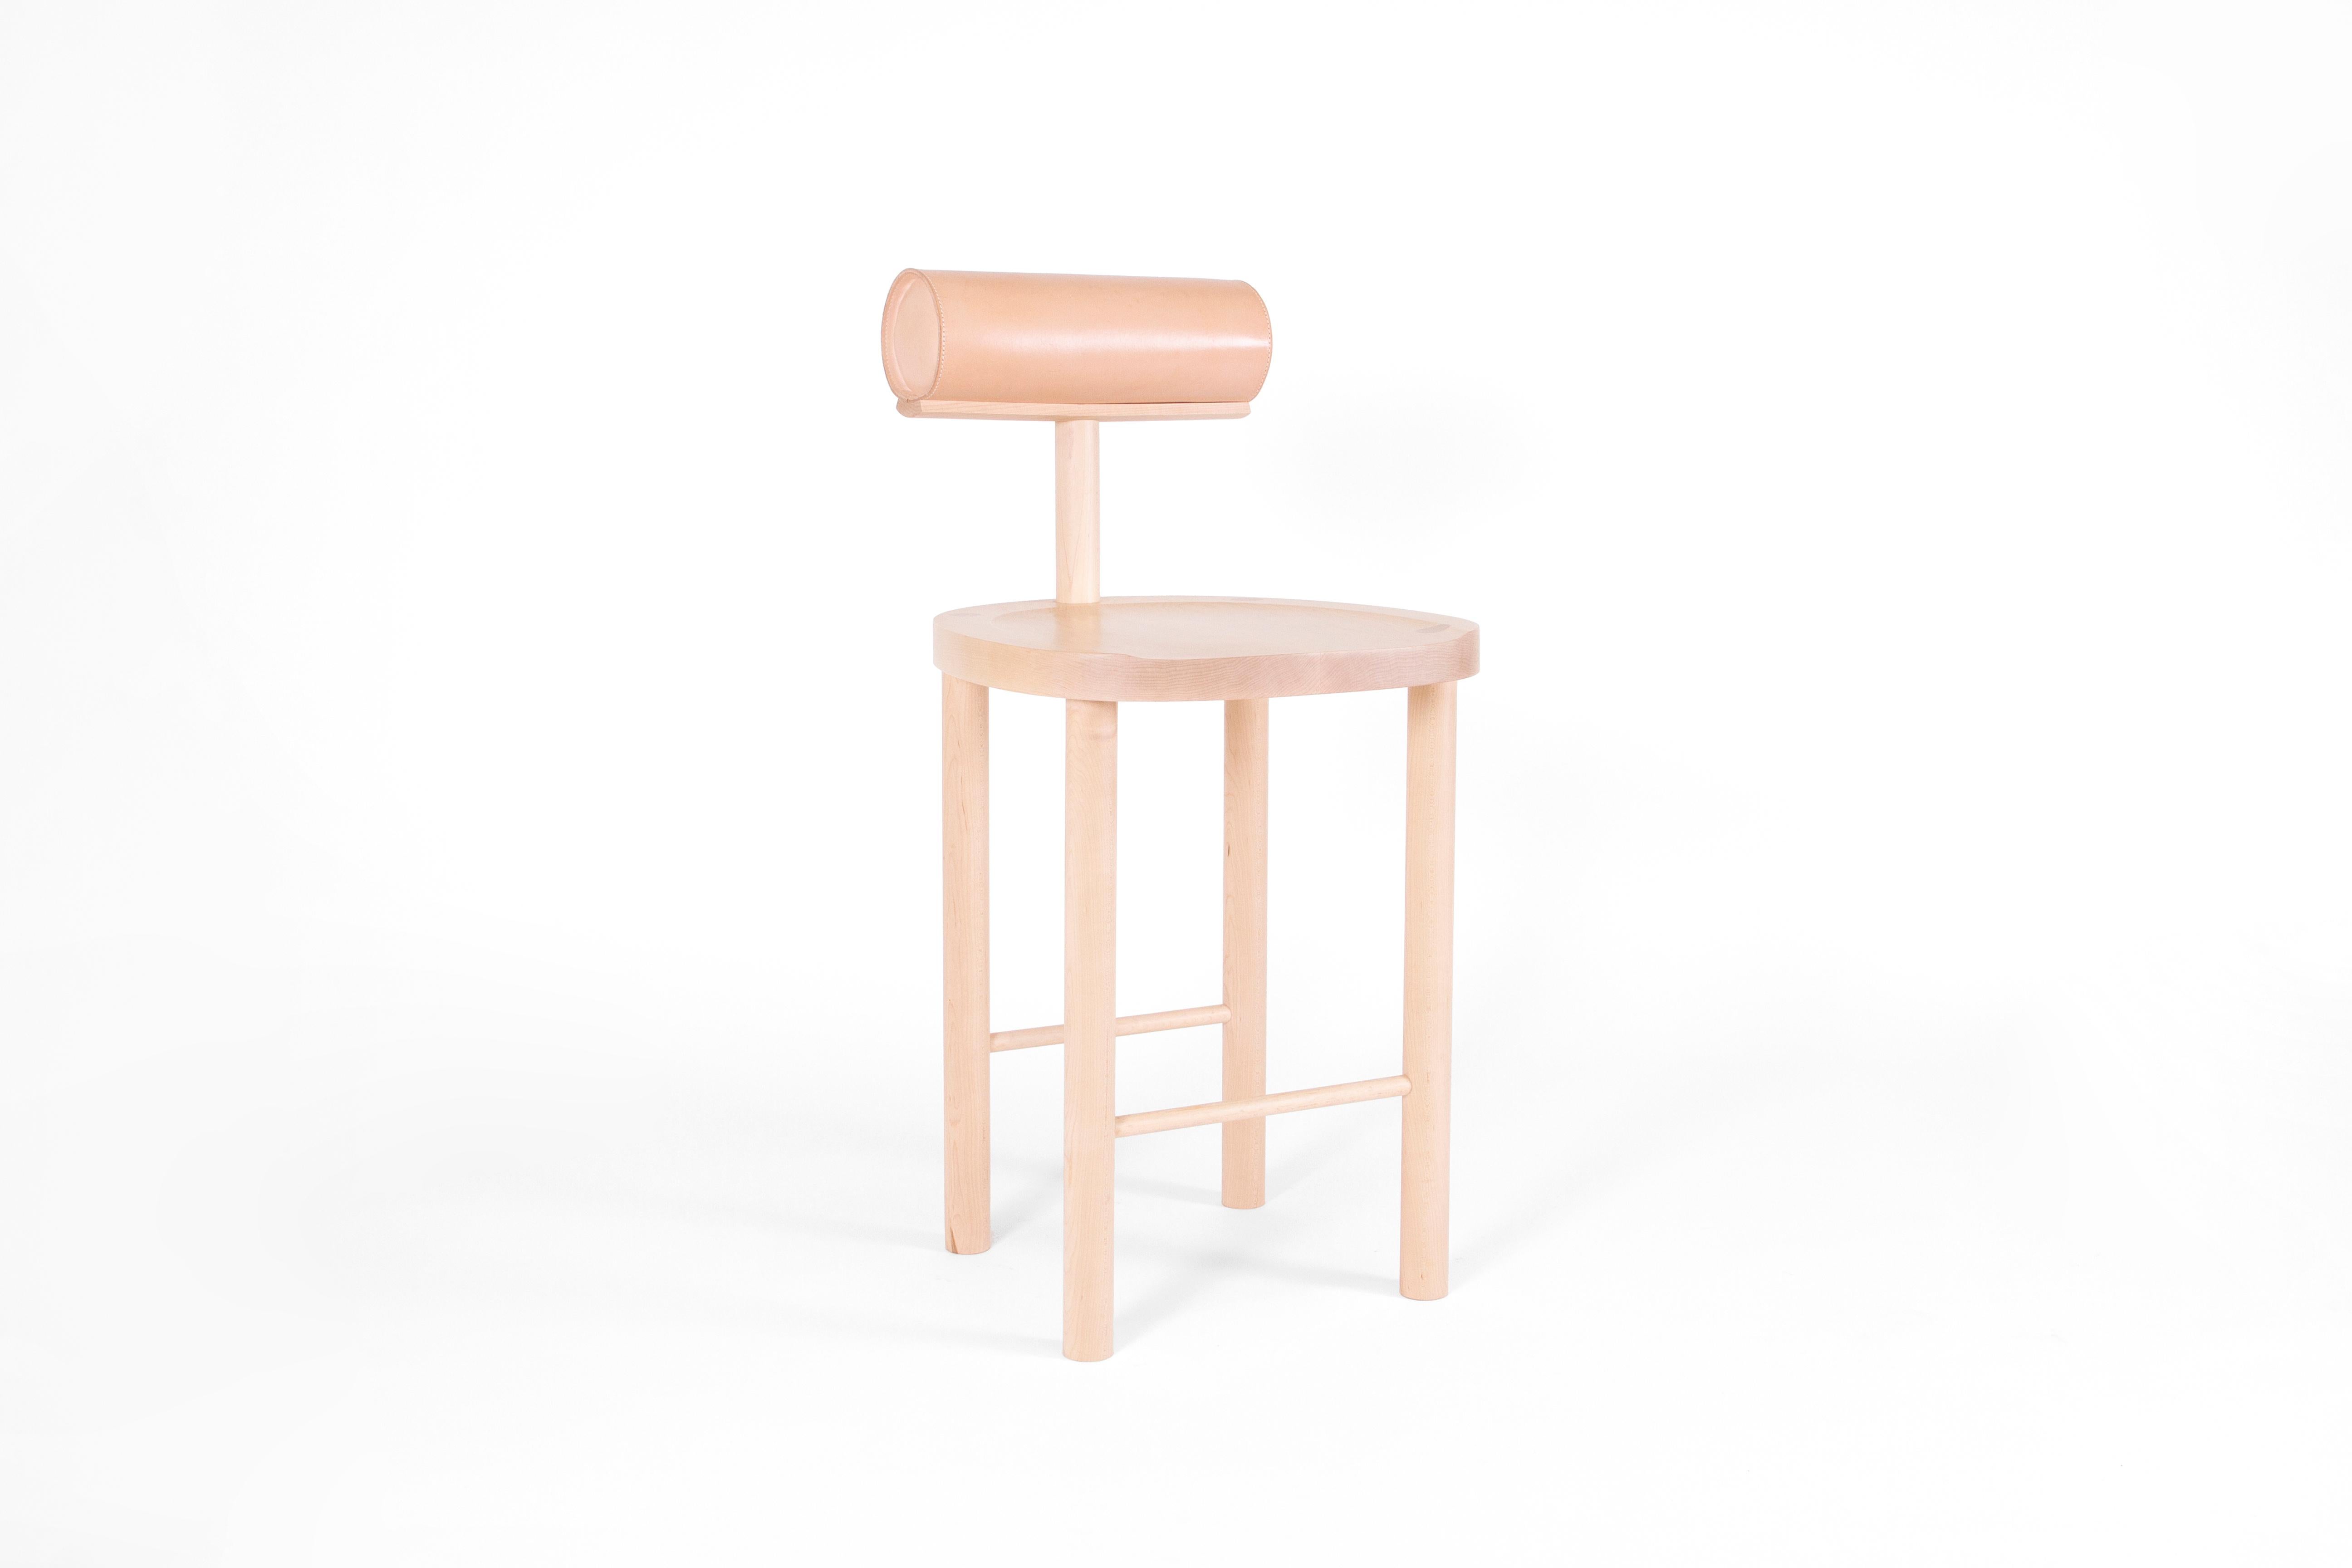 The UNA counter stool intersects a round wooden seat and legs with a leather upholstered cylindrical back. Using these fluid shapes allows greater focus on the details of the wood grain and pristinely stitched leather top. 

Made of solid maple